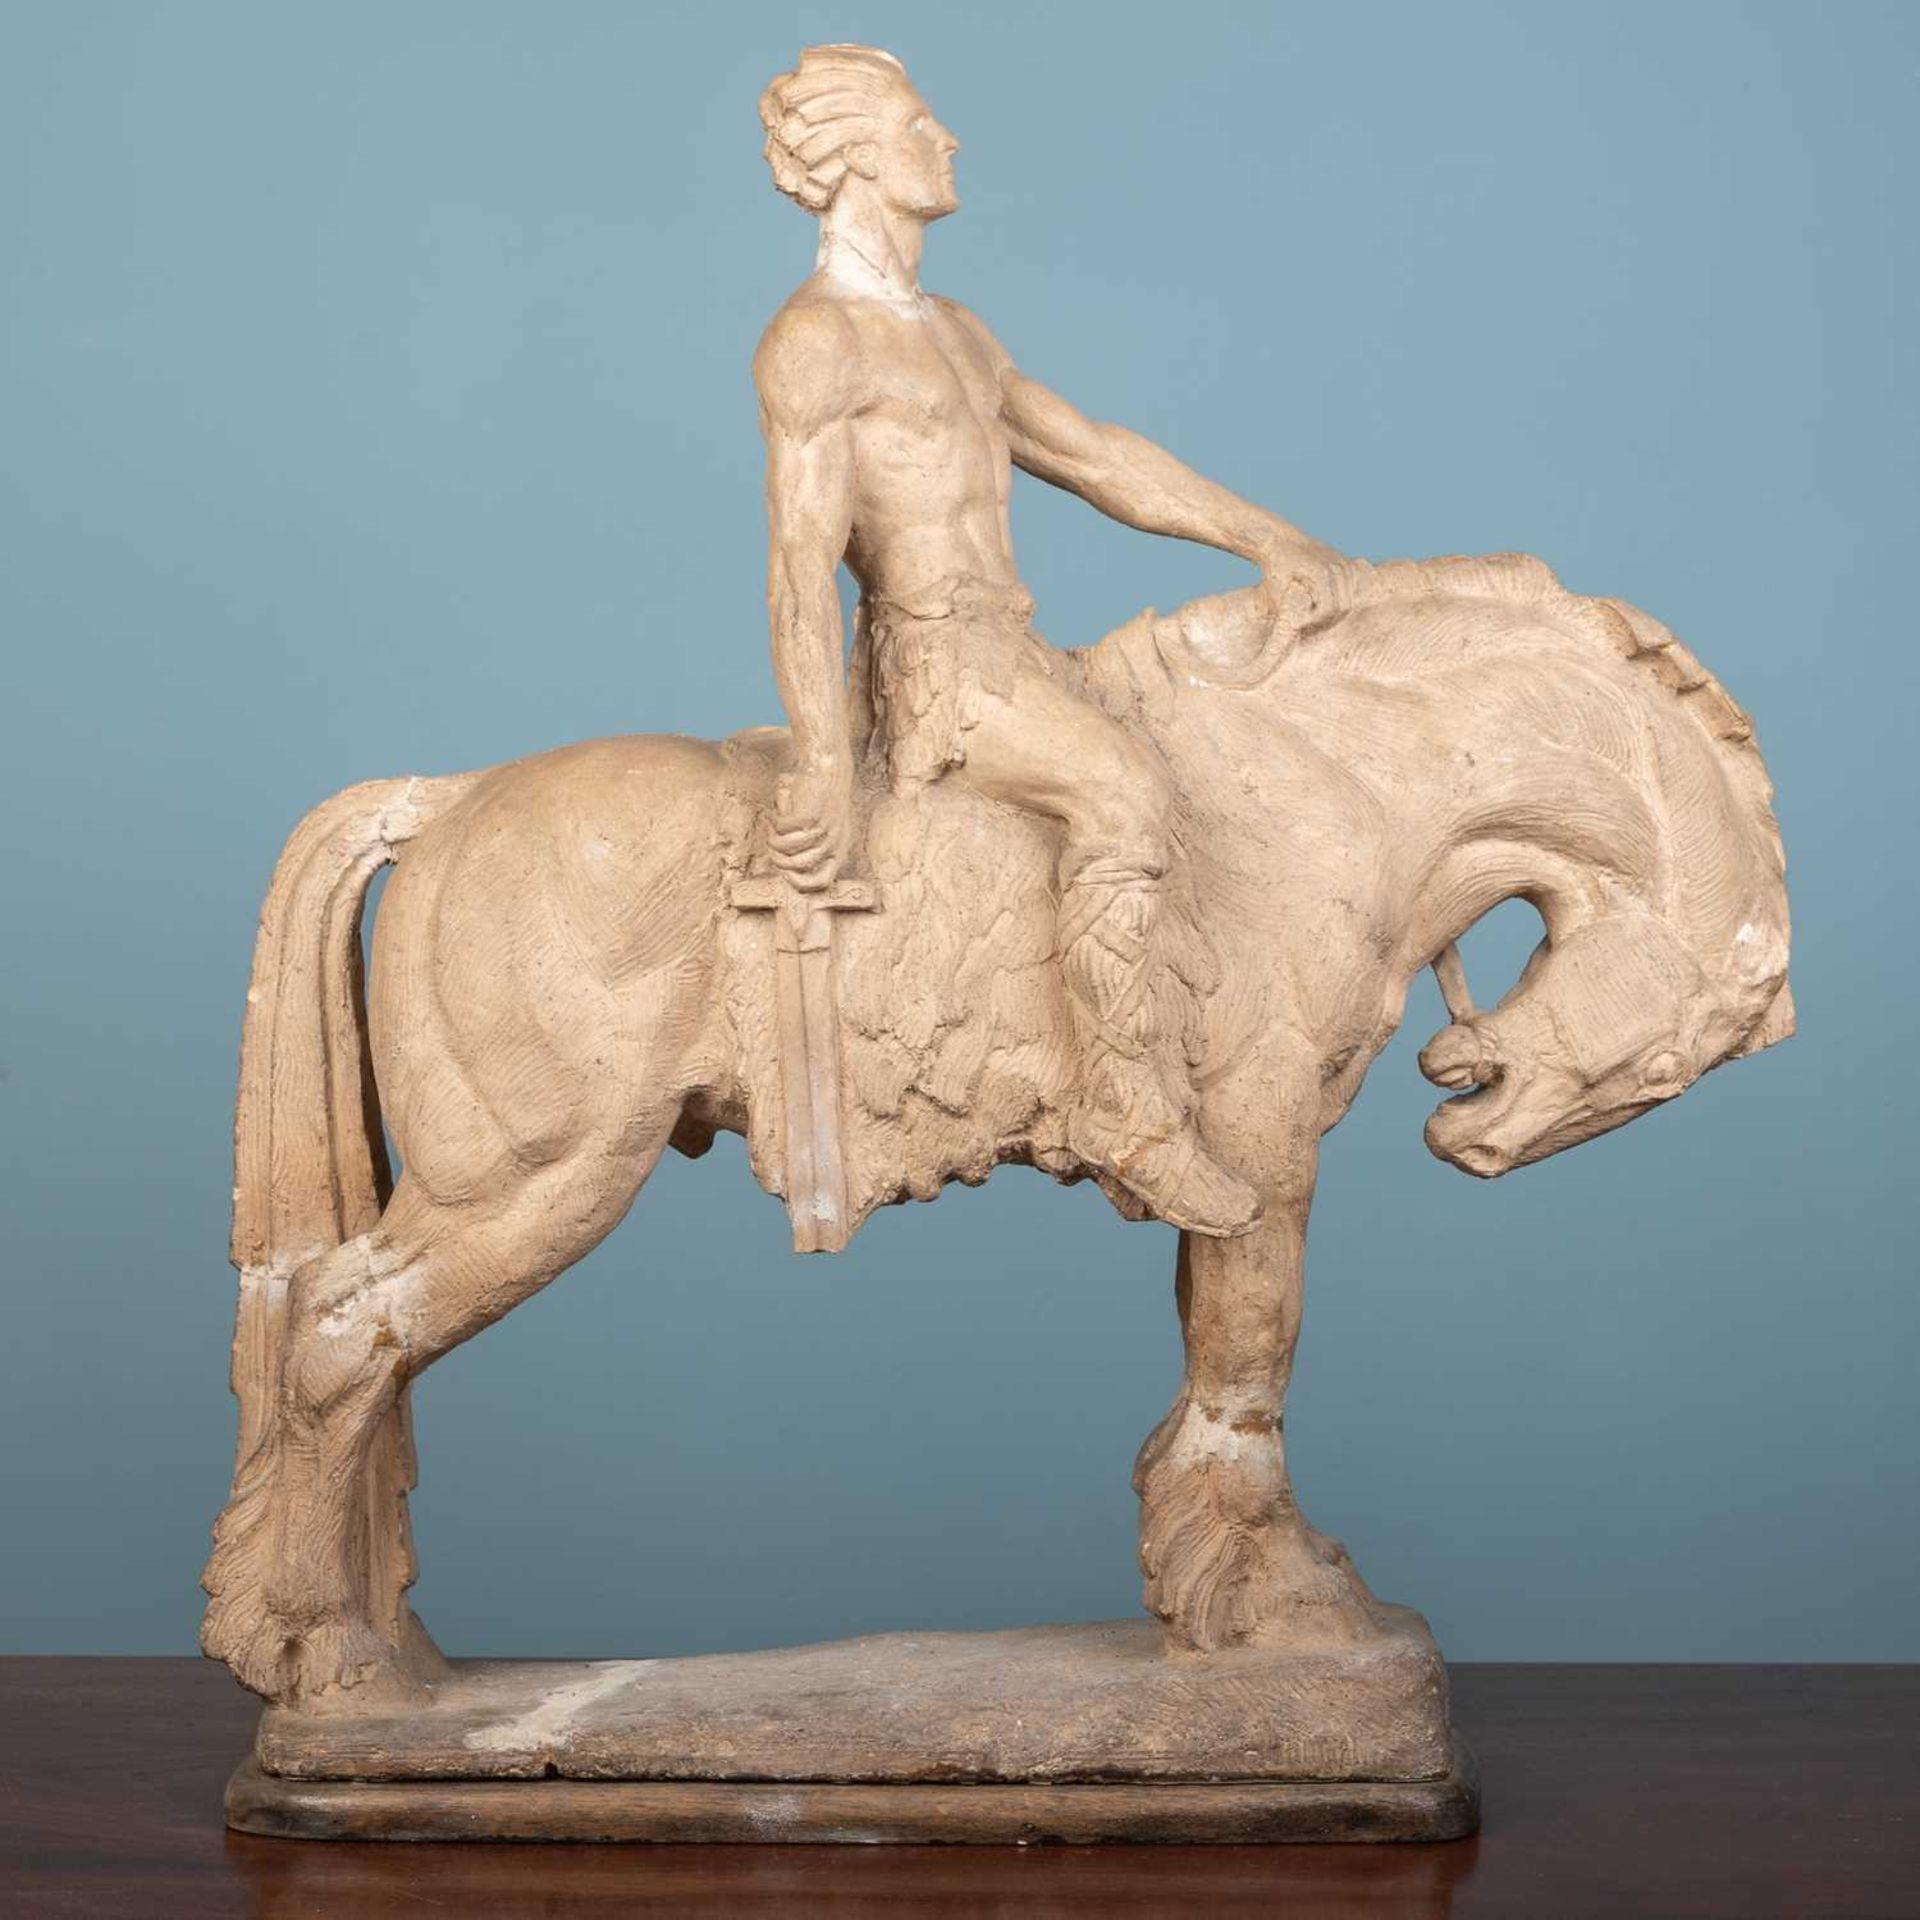 Early 20th century German school terracotta figure of a warrior on a horse